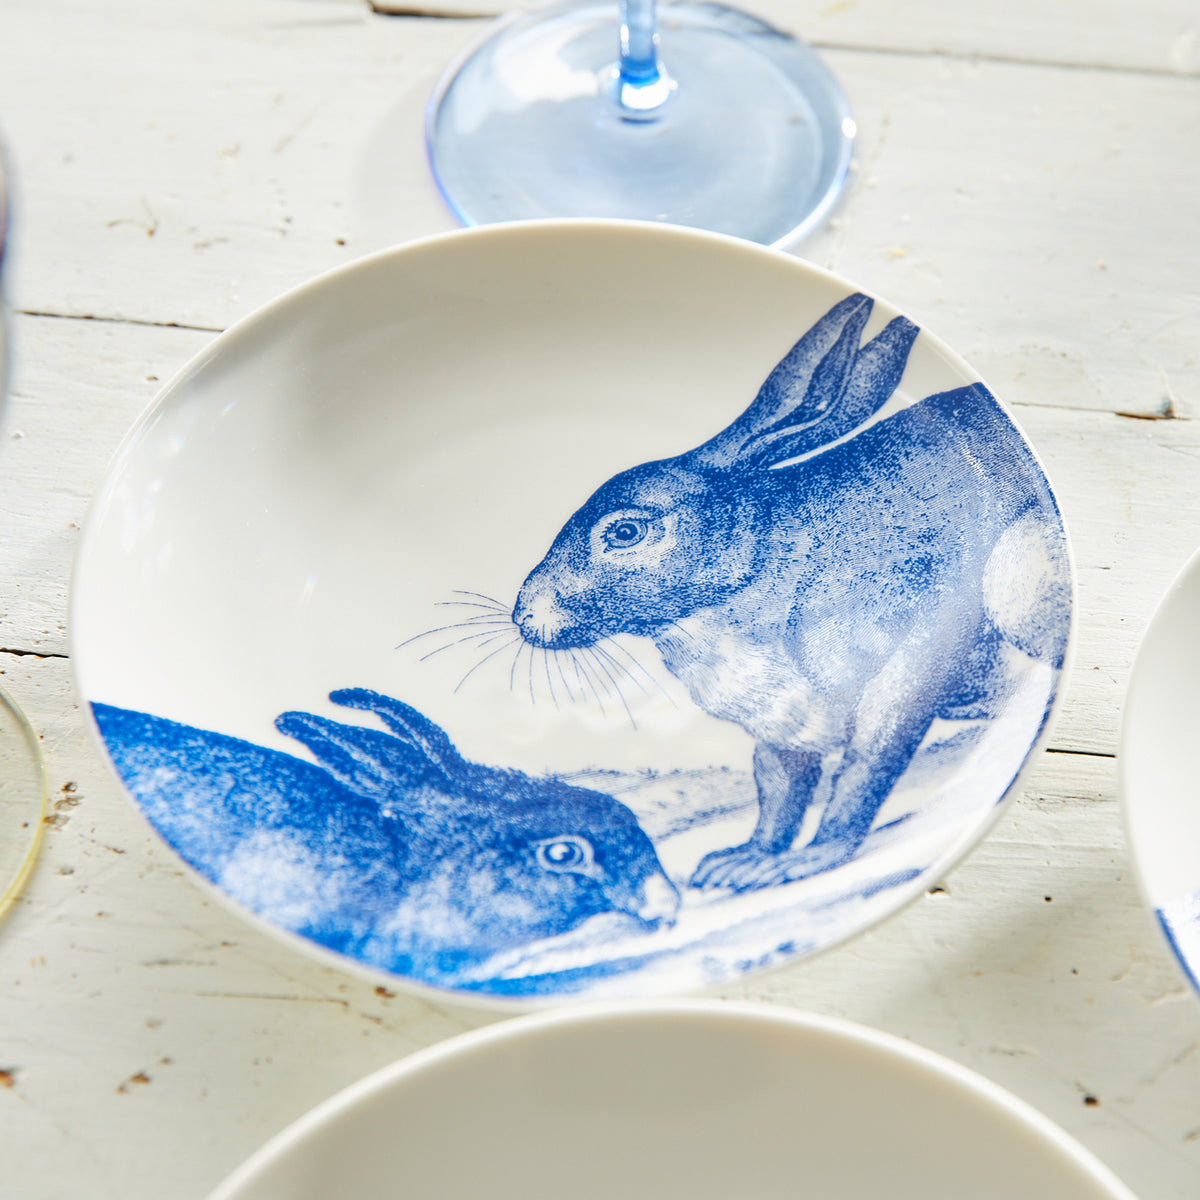 A white bowl with blue illustrations of two rabbits, one sitting upright and the other crouched. The Bunnies Small Plates, crafted from high-fired porcelain by Caskata Artisanal Home, rest on a white wooden surface next to a stemmed glass and other partially visible plates.